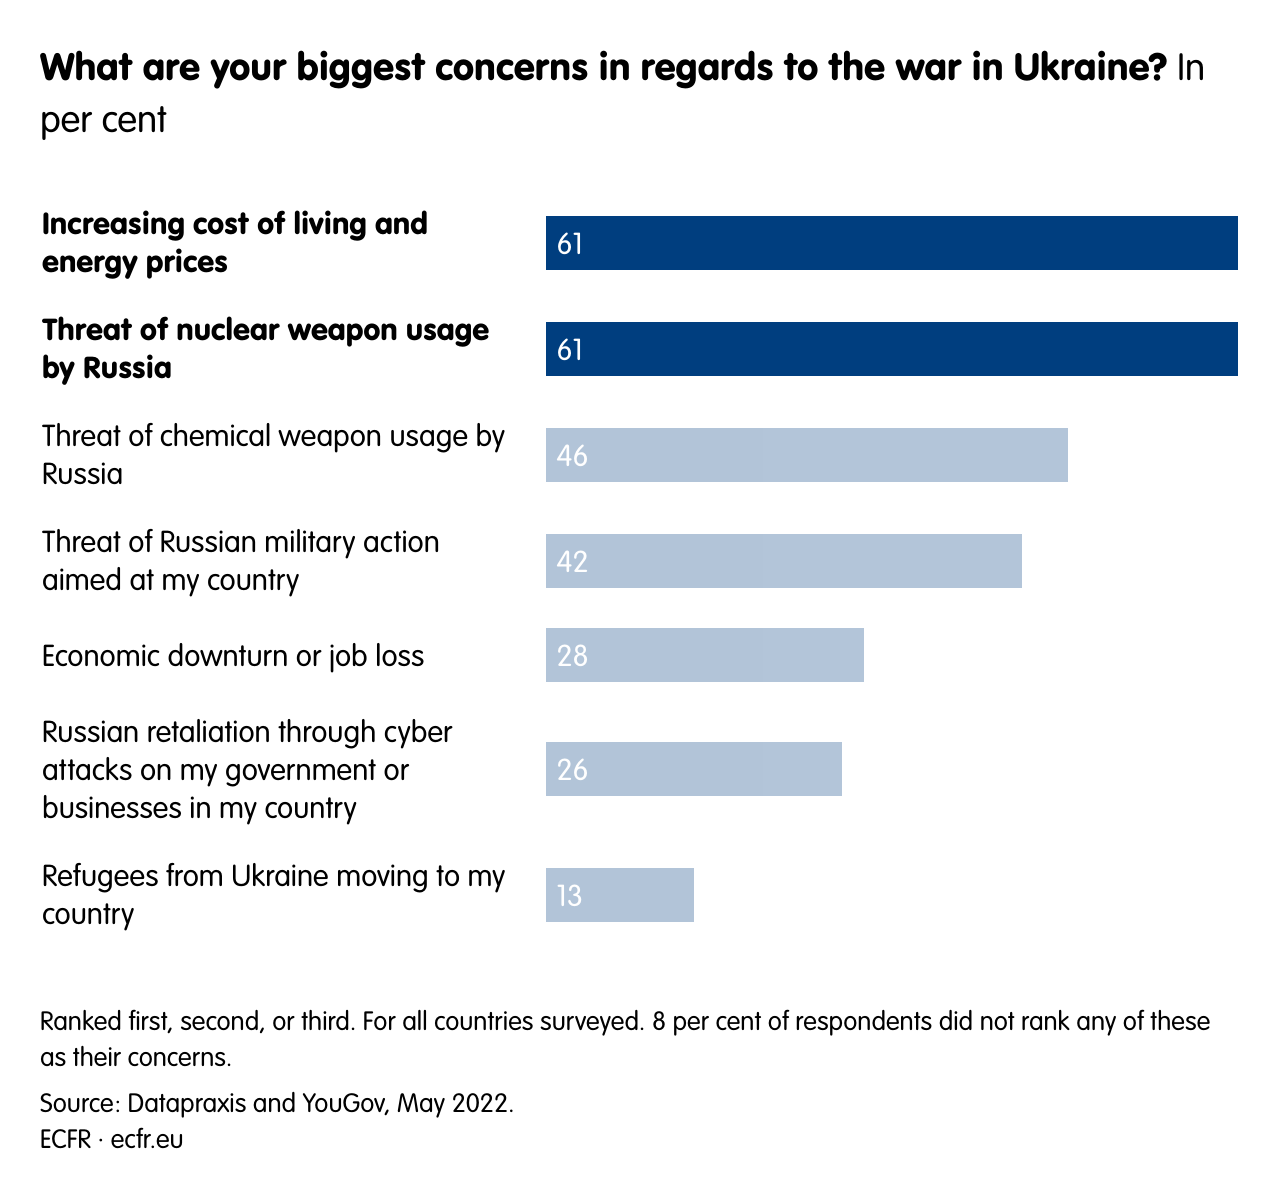 What are your biggest concerns in regards to the war in Ukraine? 